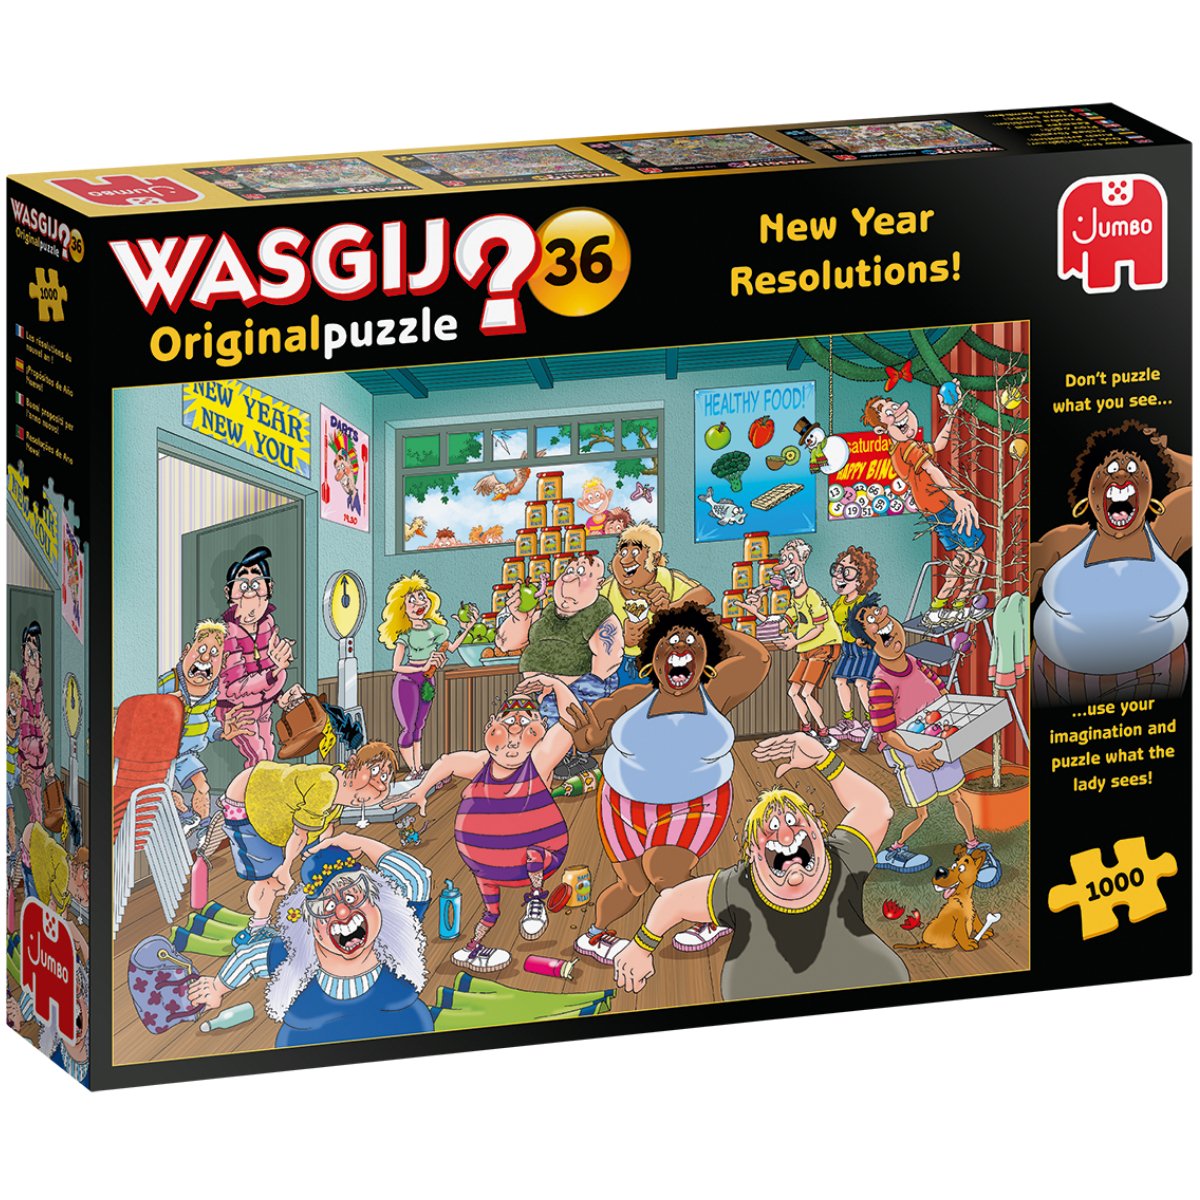 Wasgij Original 36 New Year Resolutions! Jigsaw Puzzle (1000 Pieces) - Phillips Hobbies